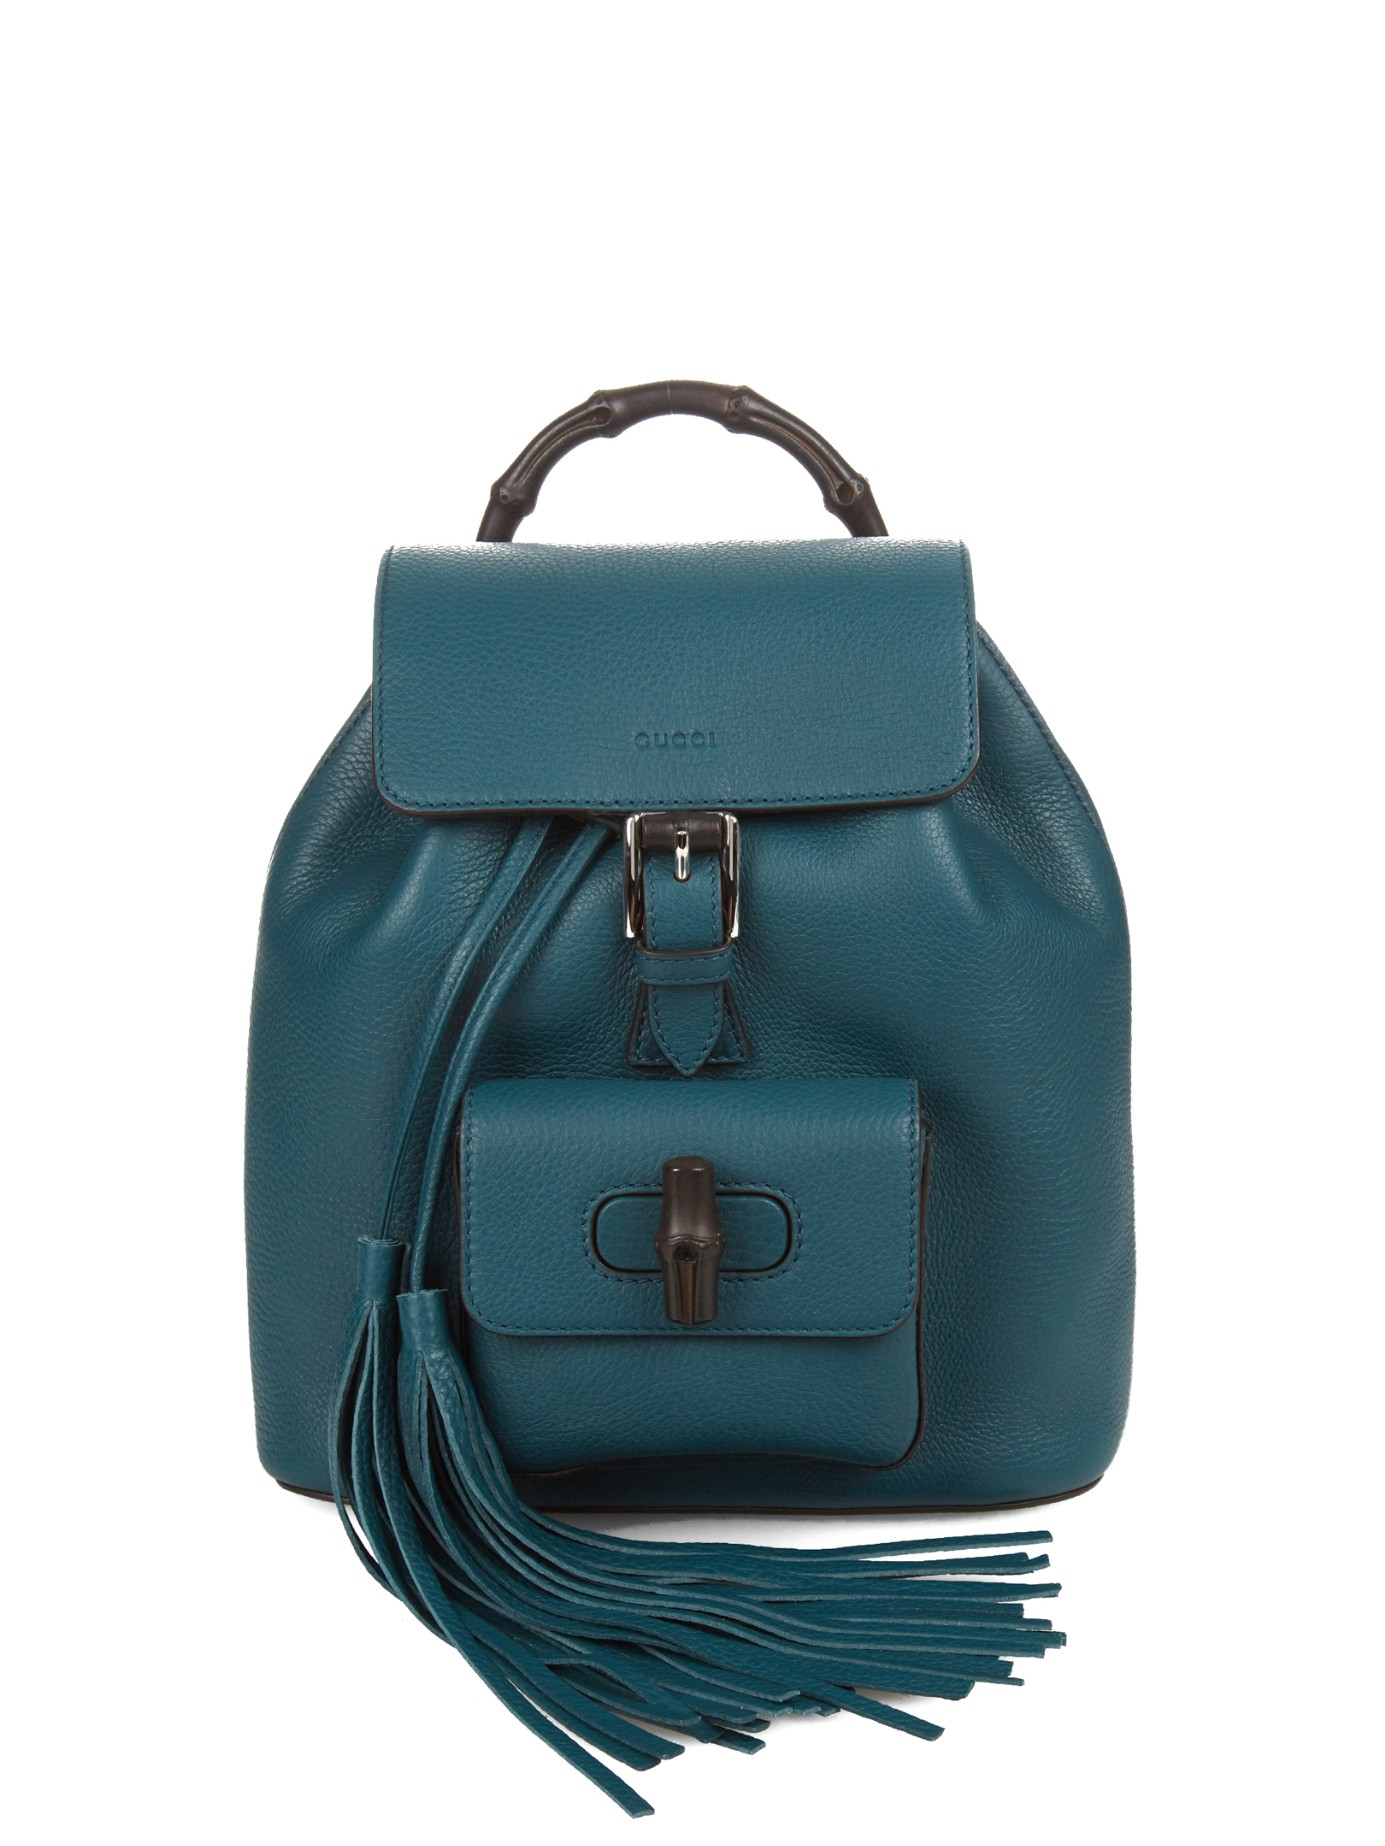 Lyst - Gucci Bamboo Mini Leather Backpack in Green